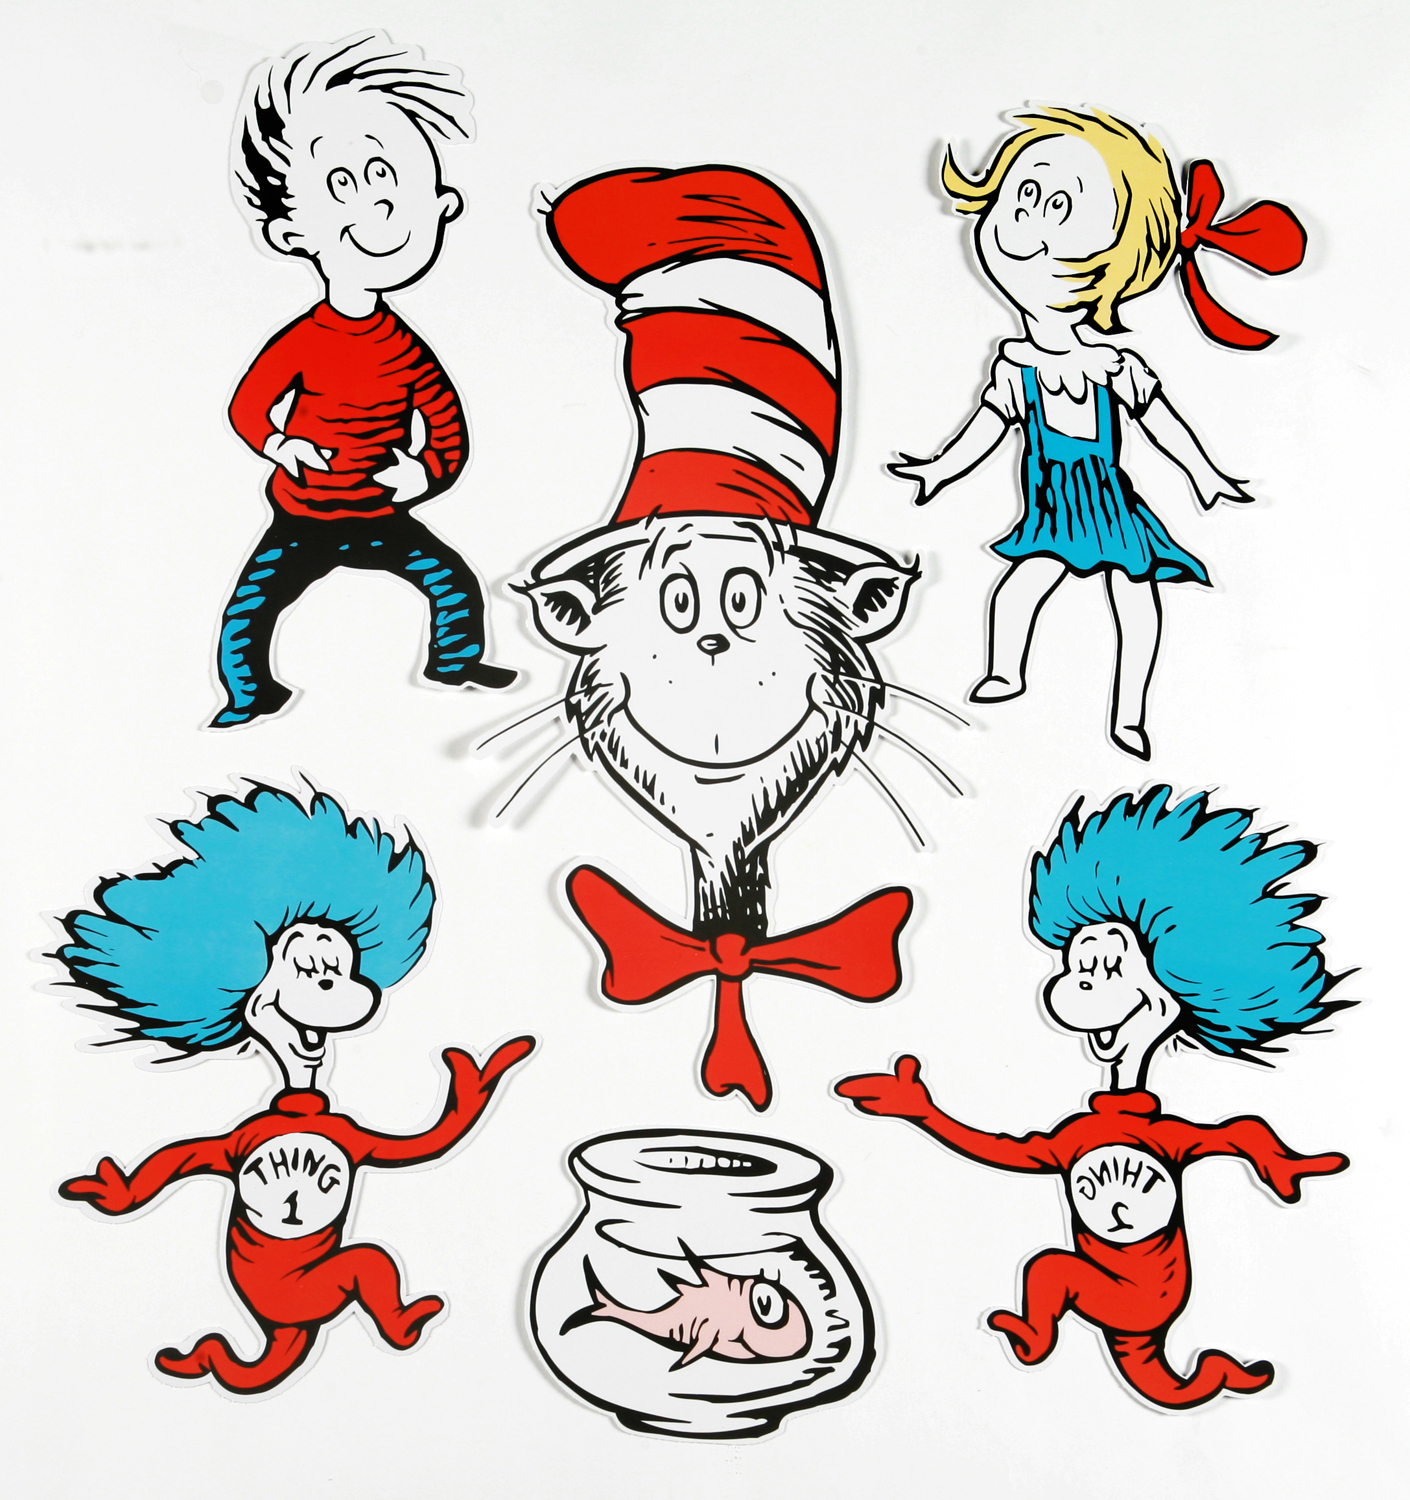 Dr Seuss all Characters drawing free image download